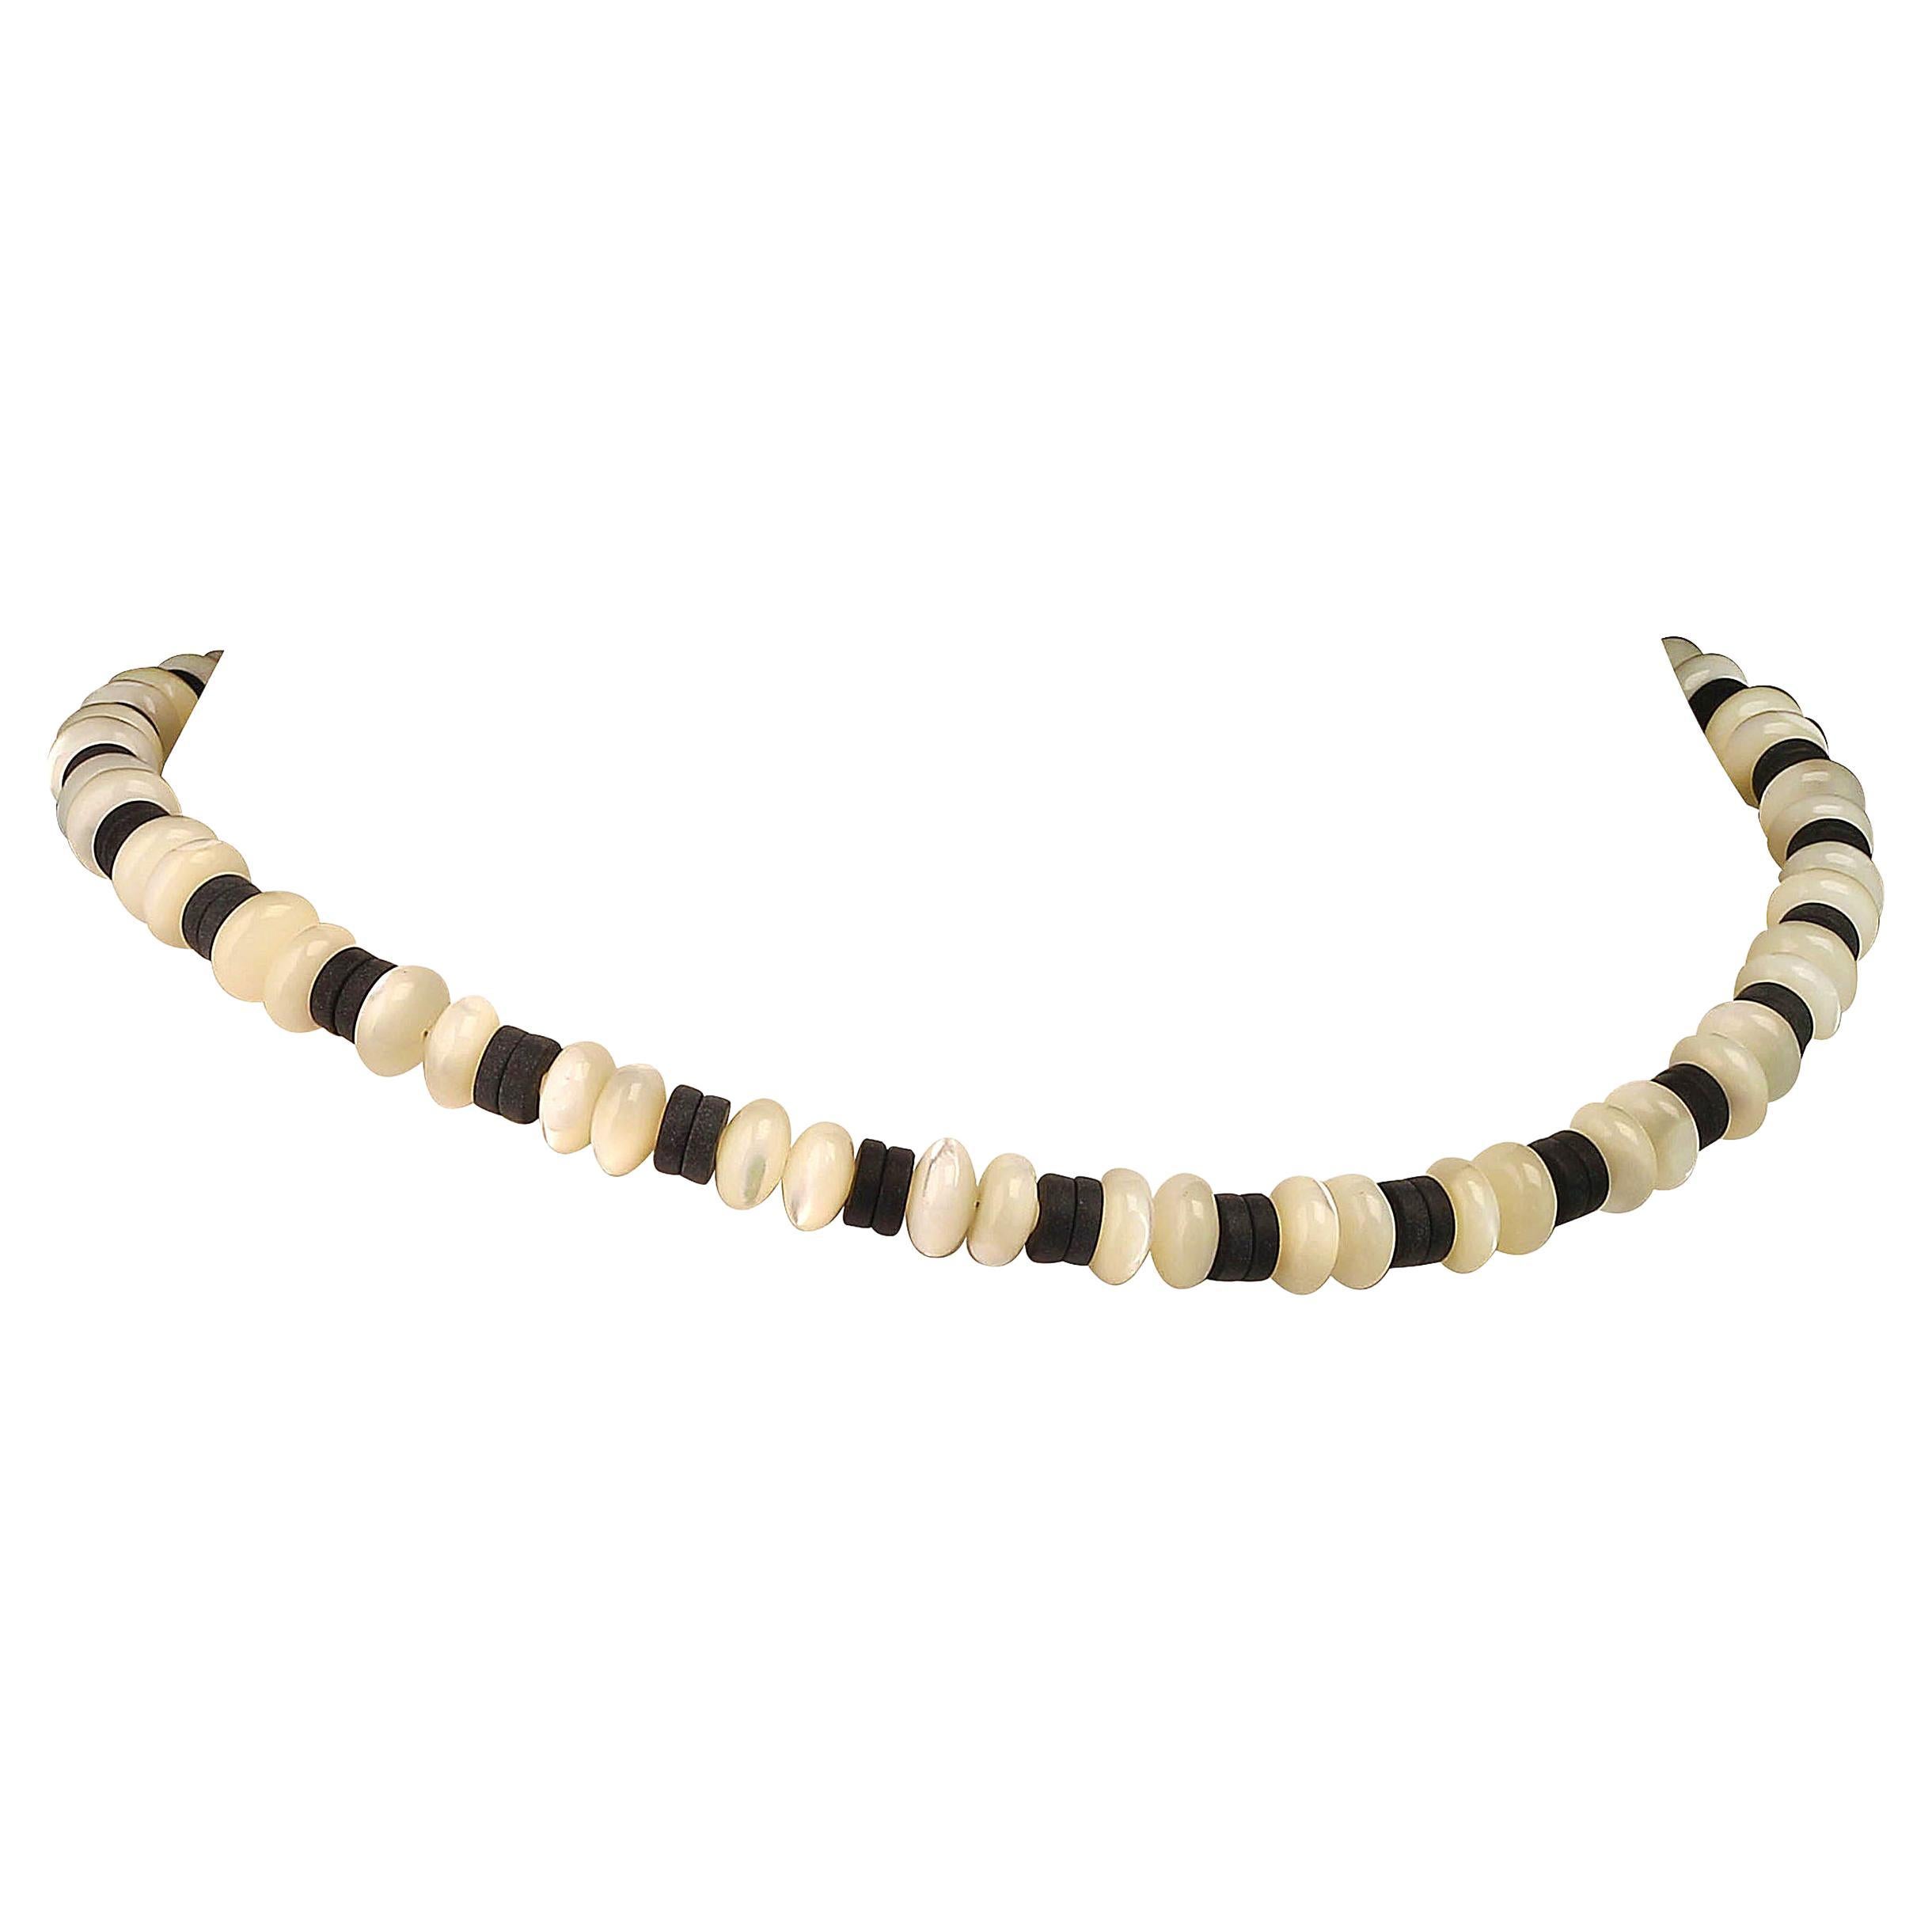 15 inch choker necklace